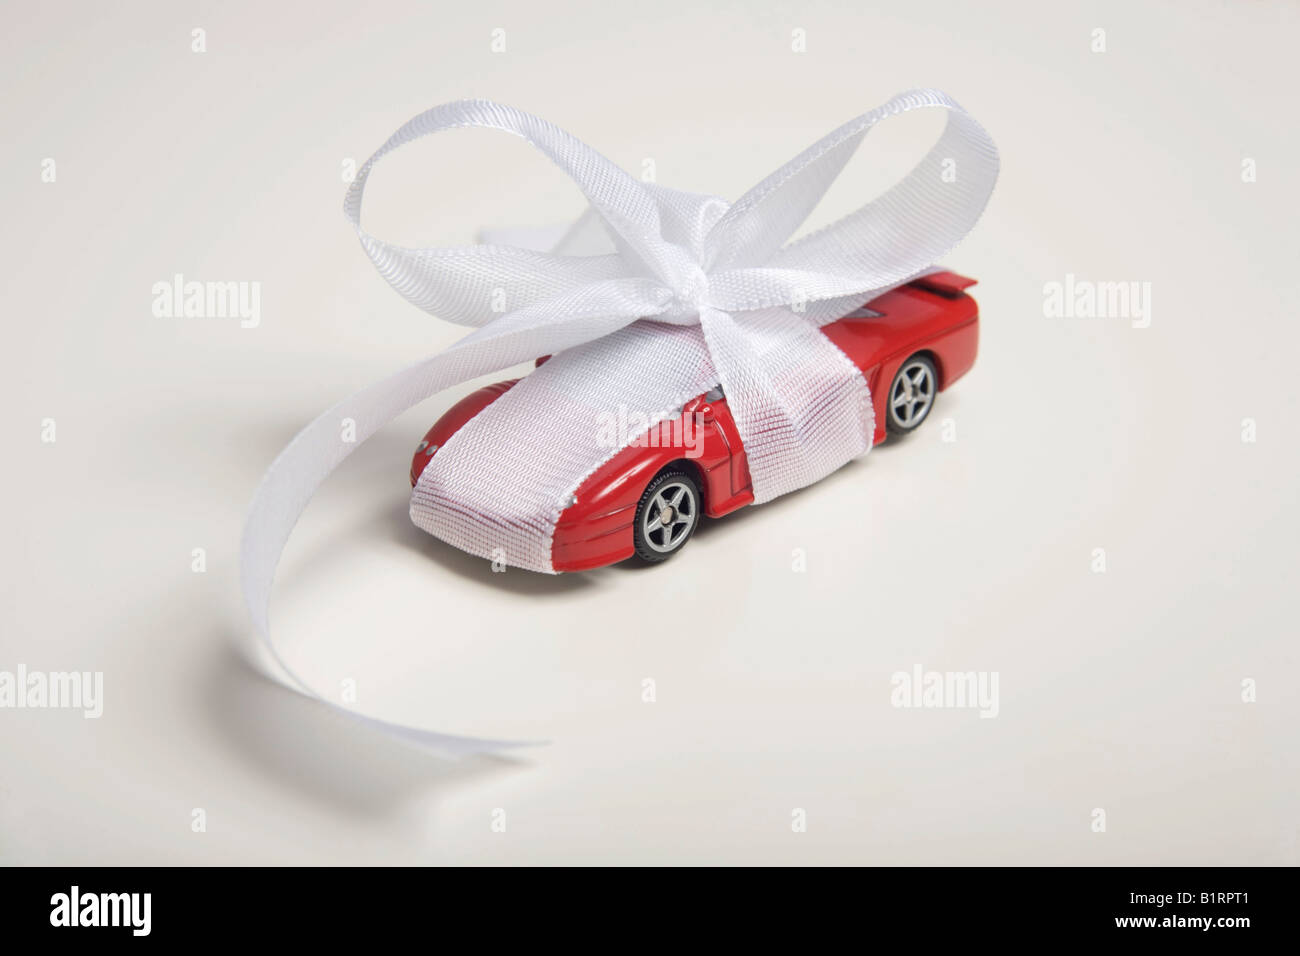 Red toy car, wrapped with a white bow as a present Stock Photo